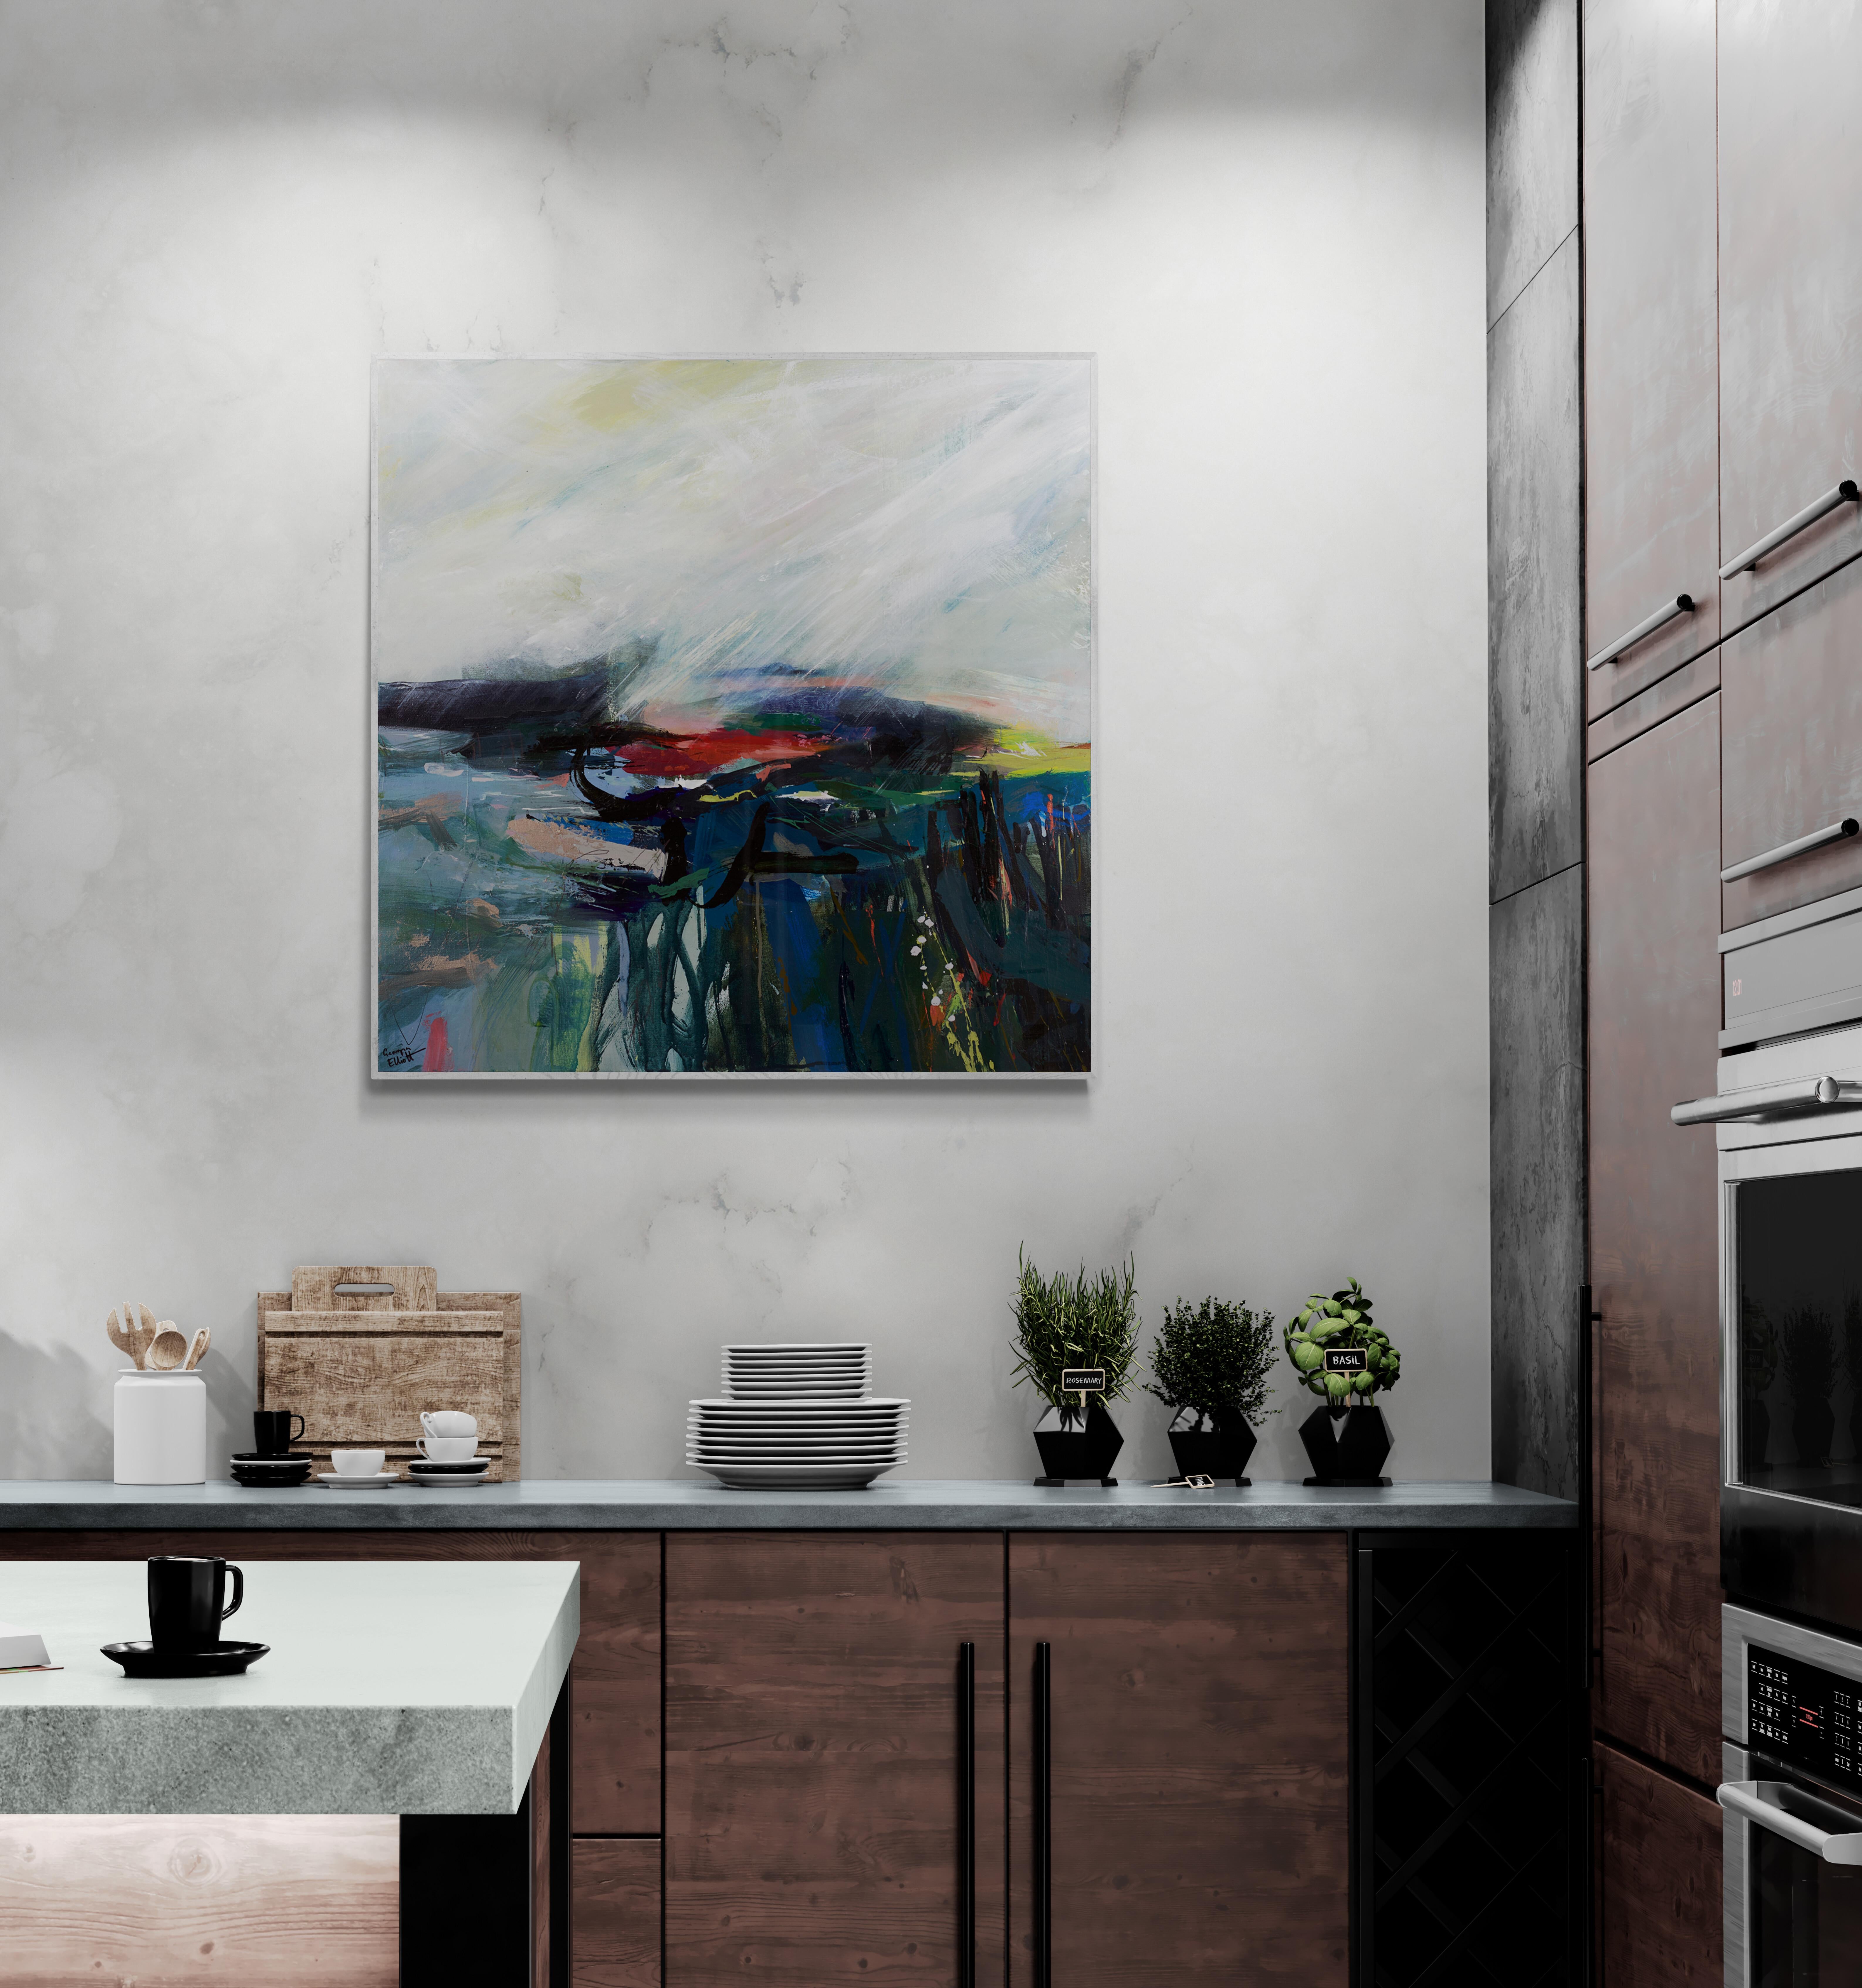 A moody, atmospheric abstract landscape painting. Original painting on canvas, sealed and UV varnished to protect from sunlight. Mixed media: Acrylic, oil stick & spray paint. Presented in a contemporary white float frame. Ready to hang. Signed on